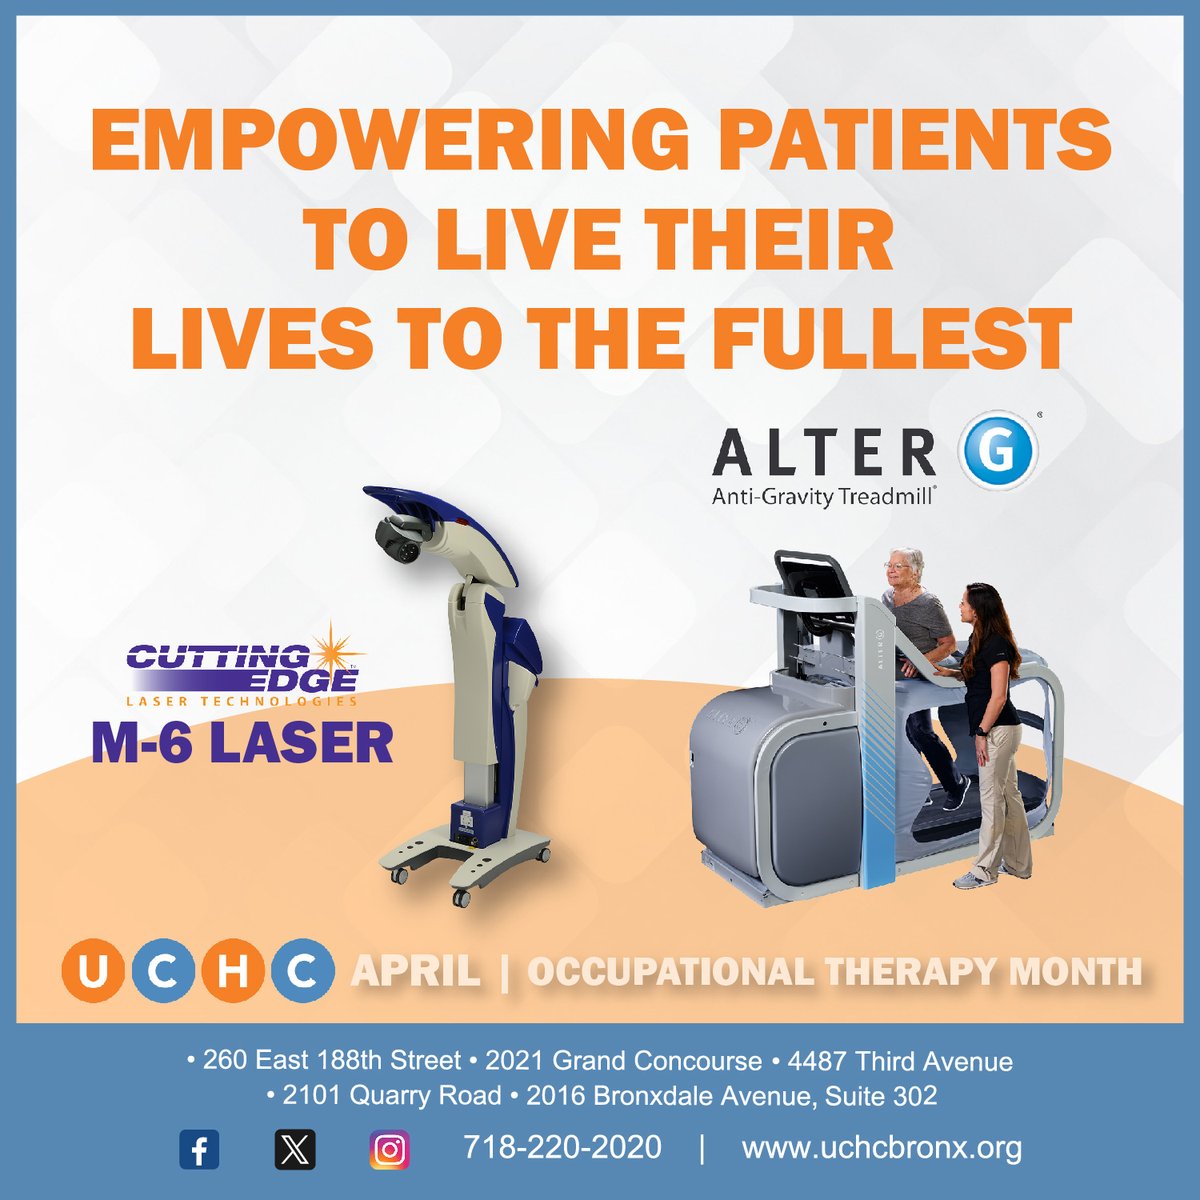 Non-invasive #UCHCBronx treatments for you this #OccupationalTherapyMonth!
- M6 MLS Laser: regenerates diseased tissue
- AlterG Treadmill: Accelerates recovery without pain

☎️718-220-2020 for appointments!
#NACHC #CHCANYS #ValueCHCs #UCHCcares #OTMonth